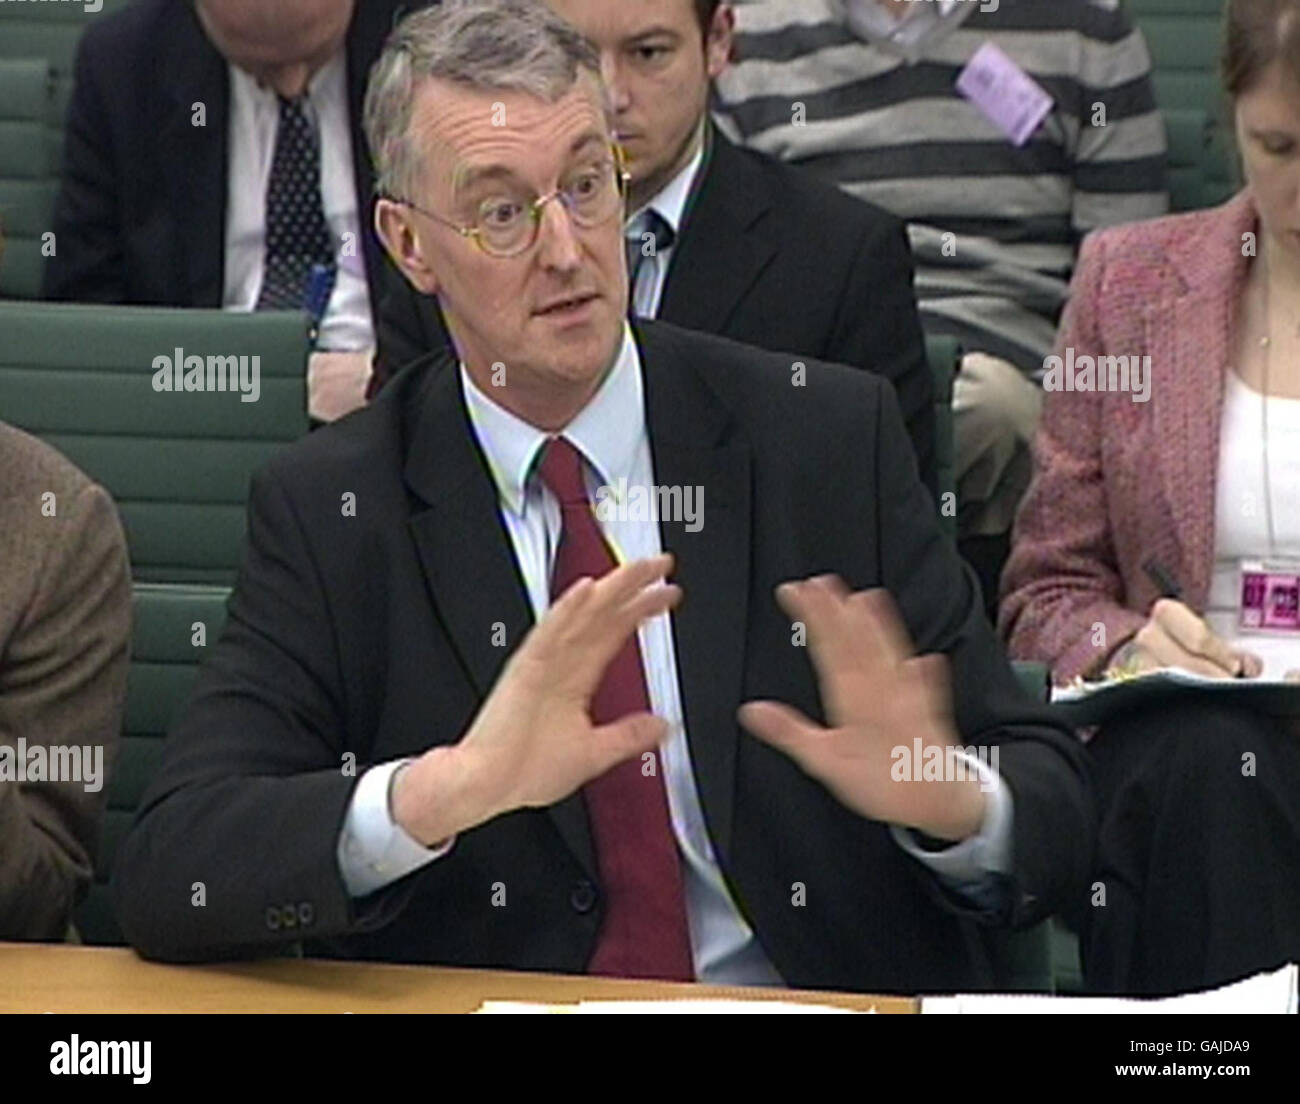 Environment Secretary Hilary Benn speaks during the Environment, Food and Rural Affairs committee meeting inside the Houses of Parliament, London. Stock Photo